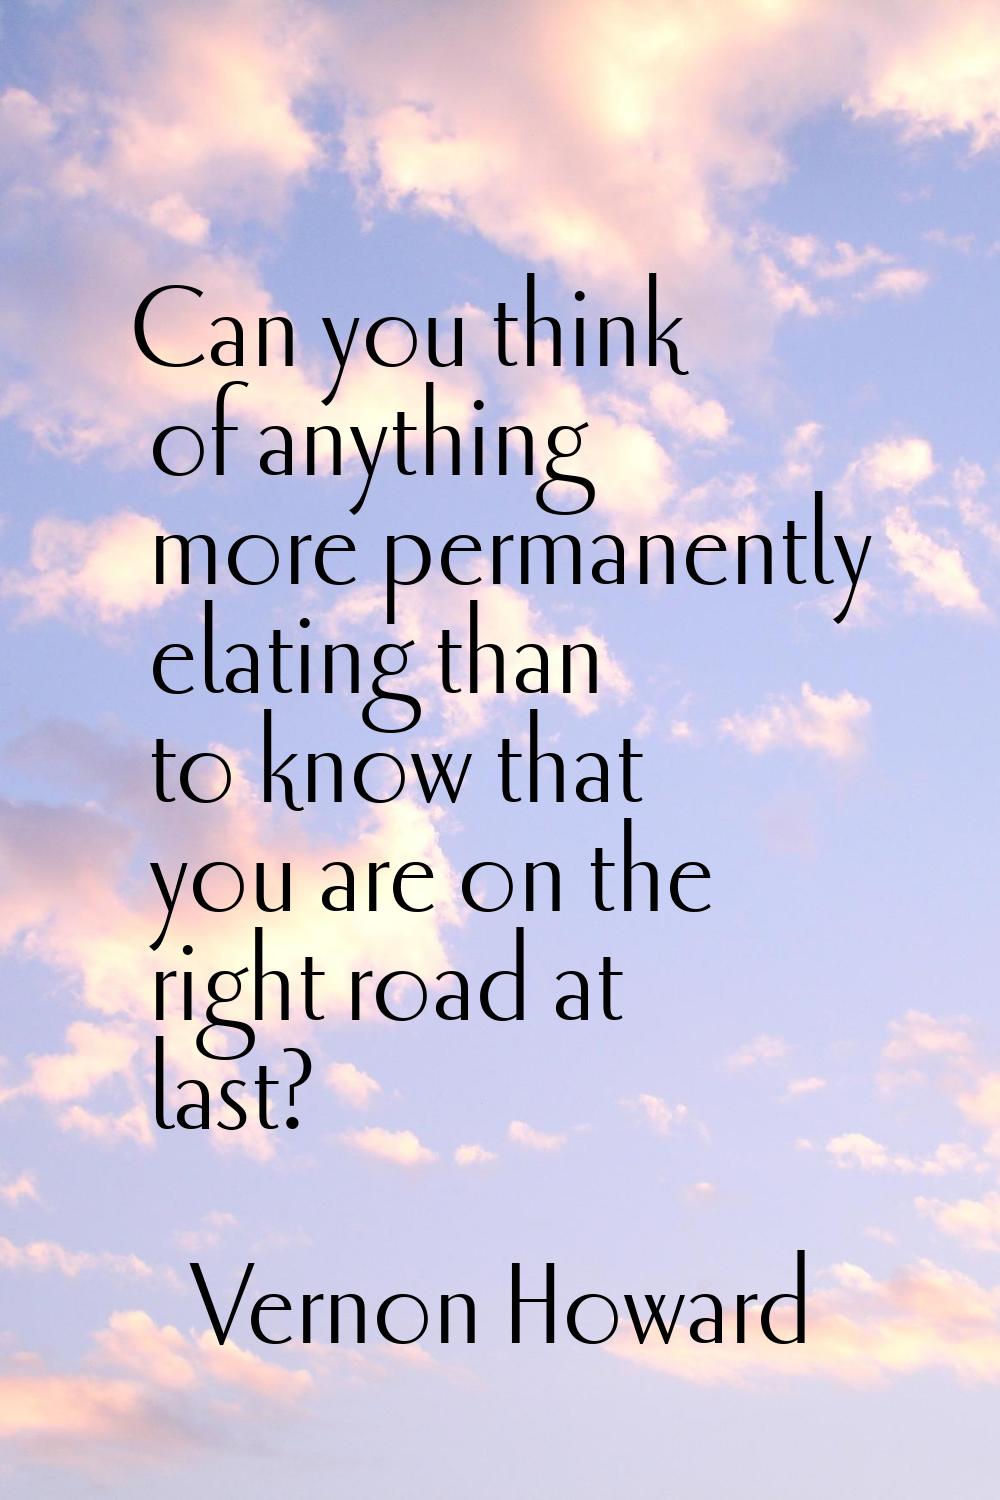 Can you think of anything more permanently elating than to know that you are on the right road at l